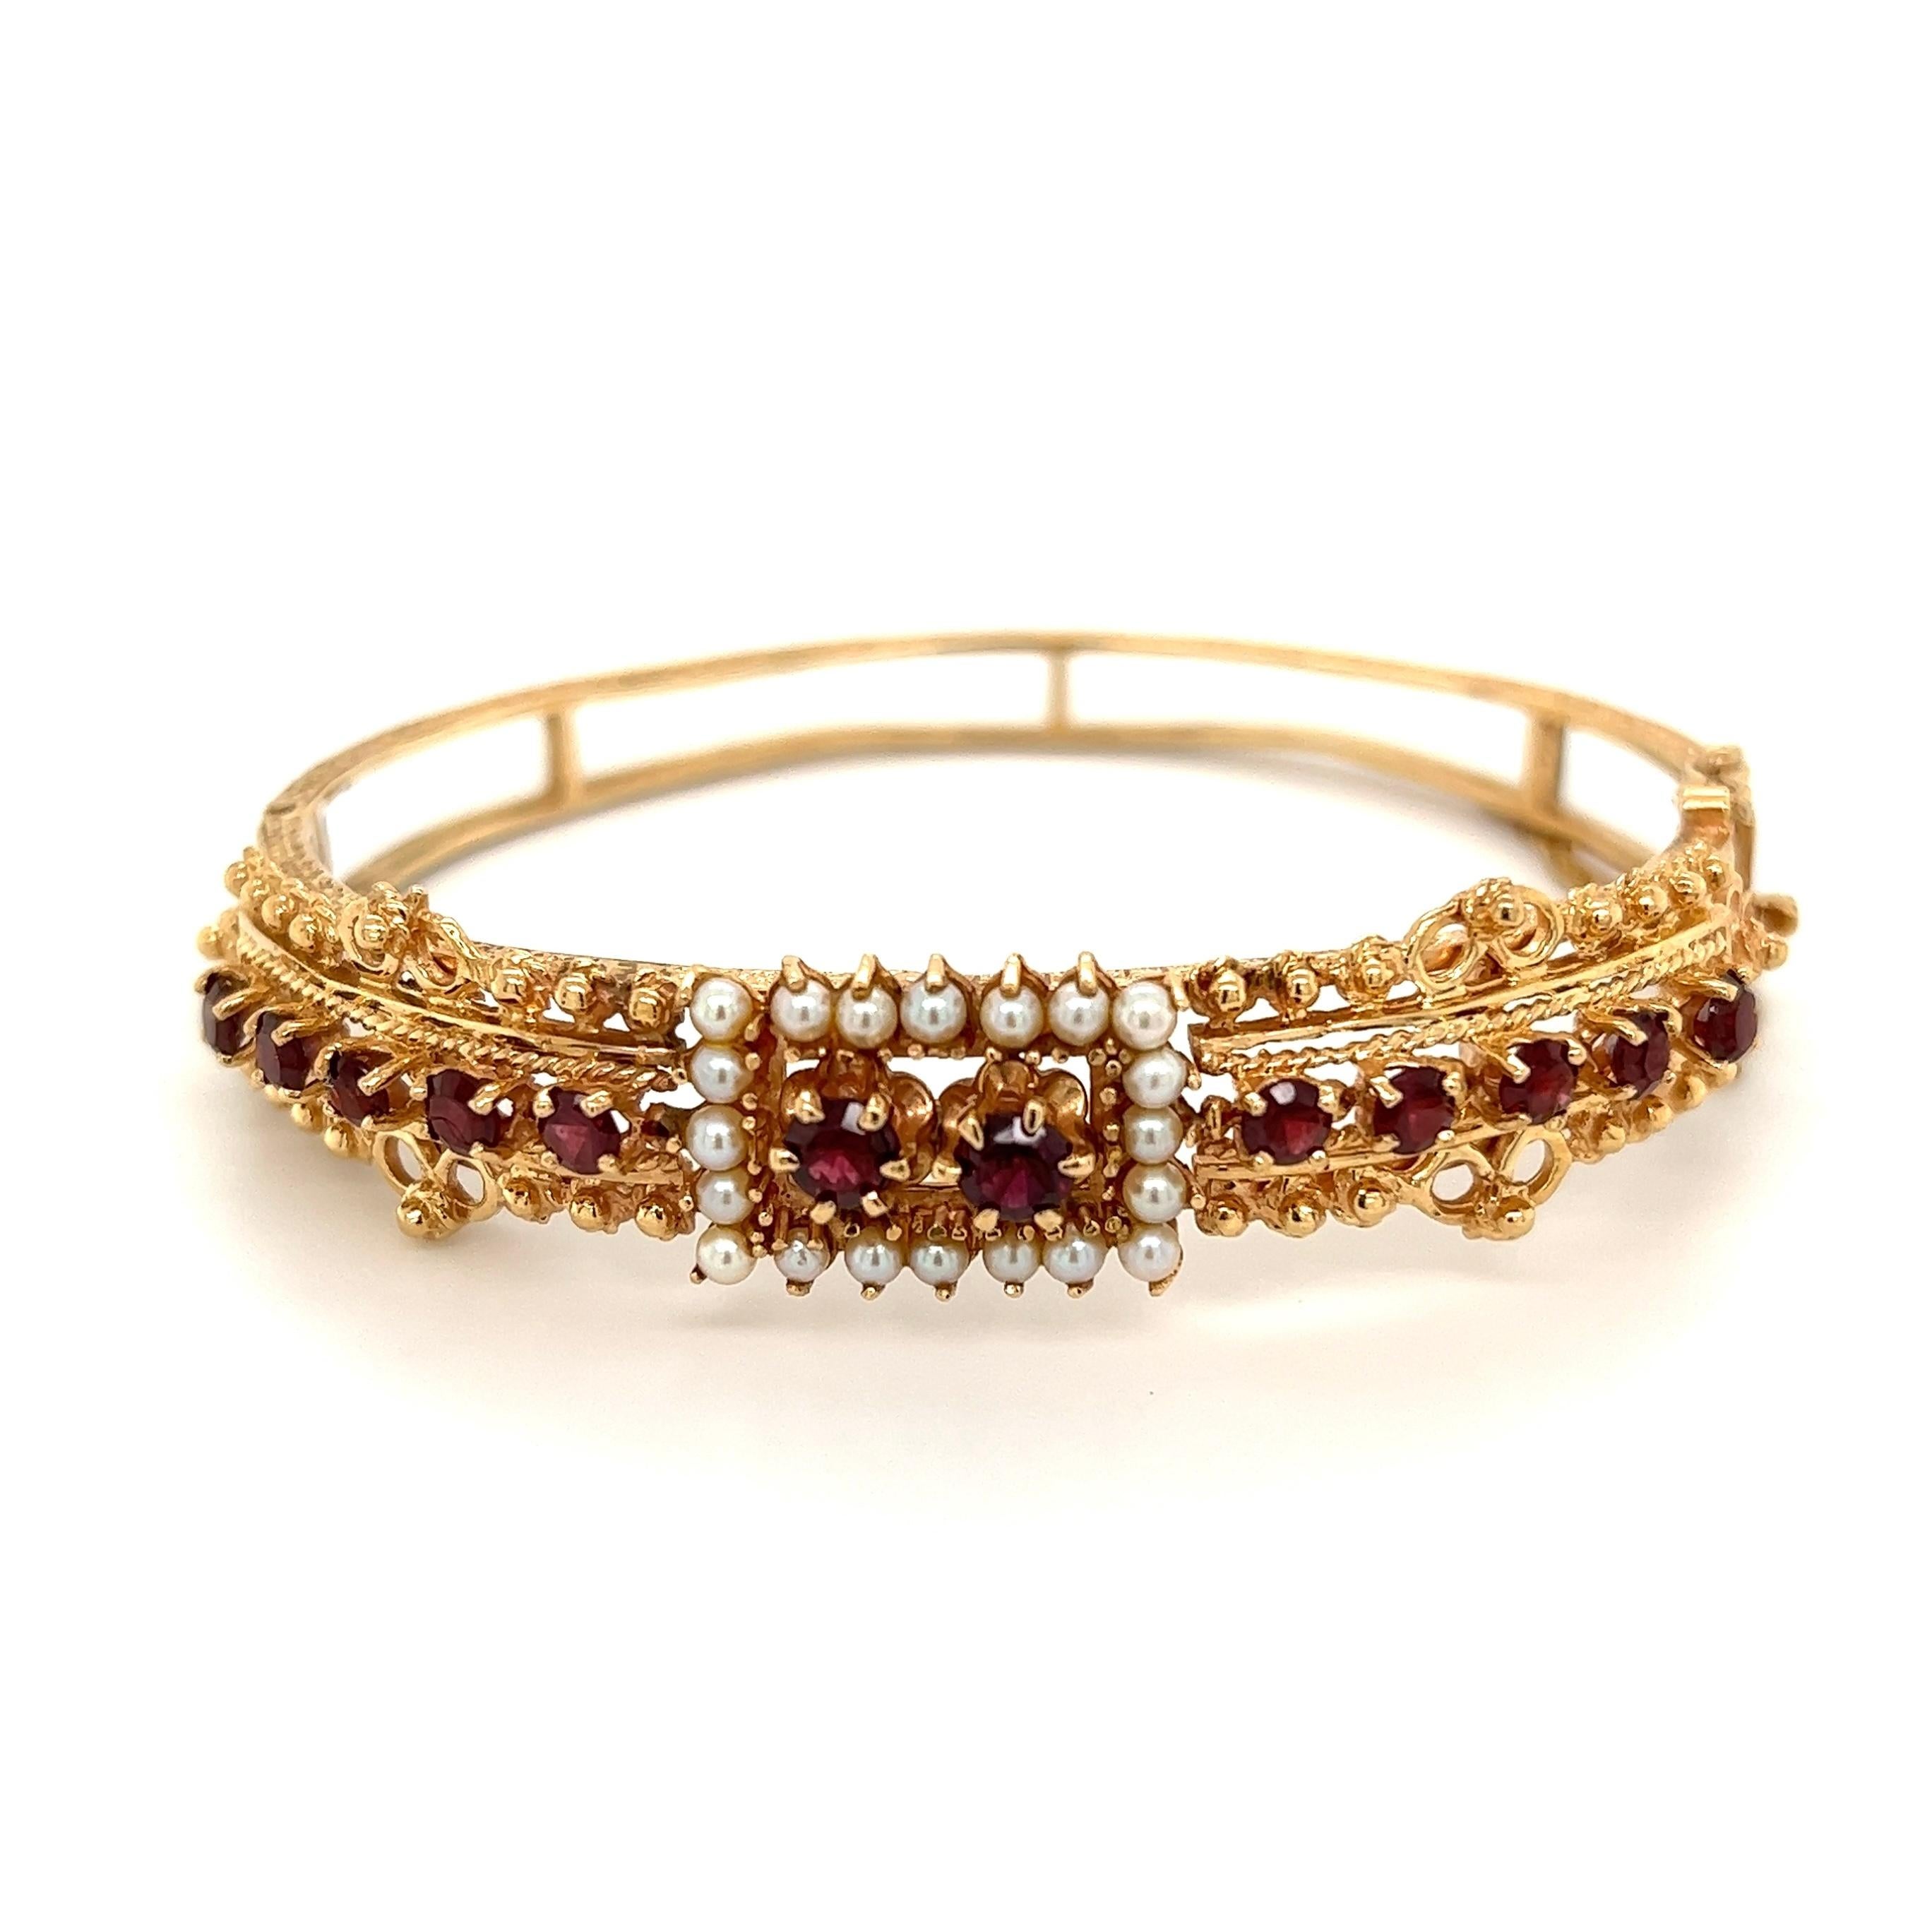 Mixed Cut Garnet and Seed Pearl Victorian Revival Gold Cuff Bangle Bracelet For Sale